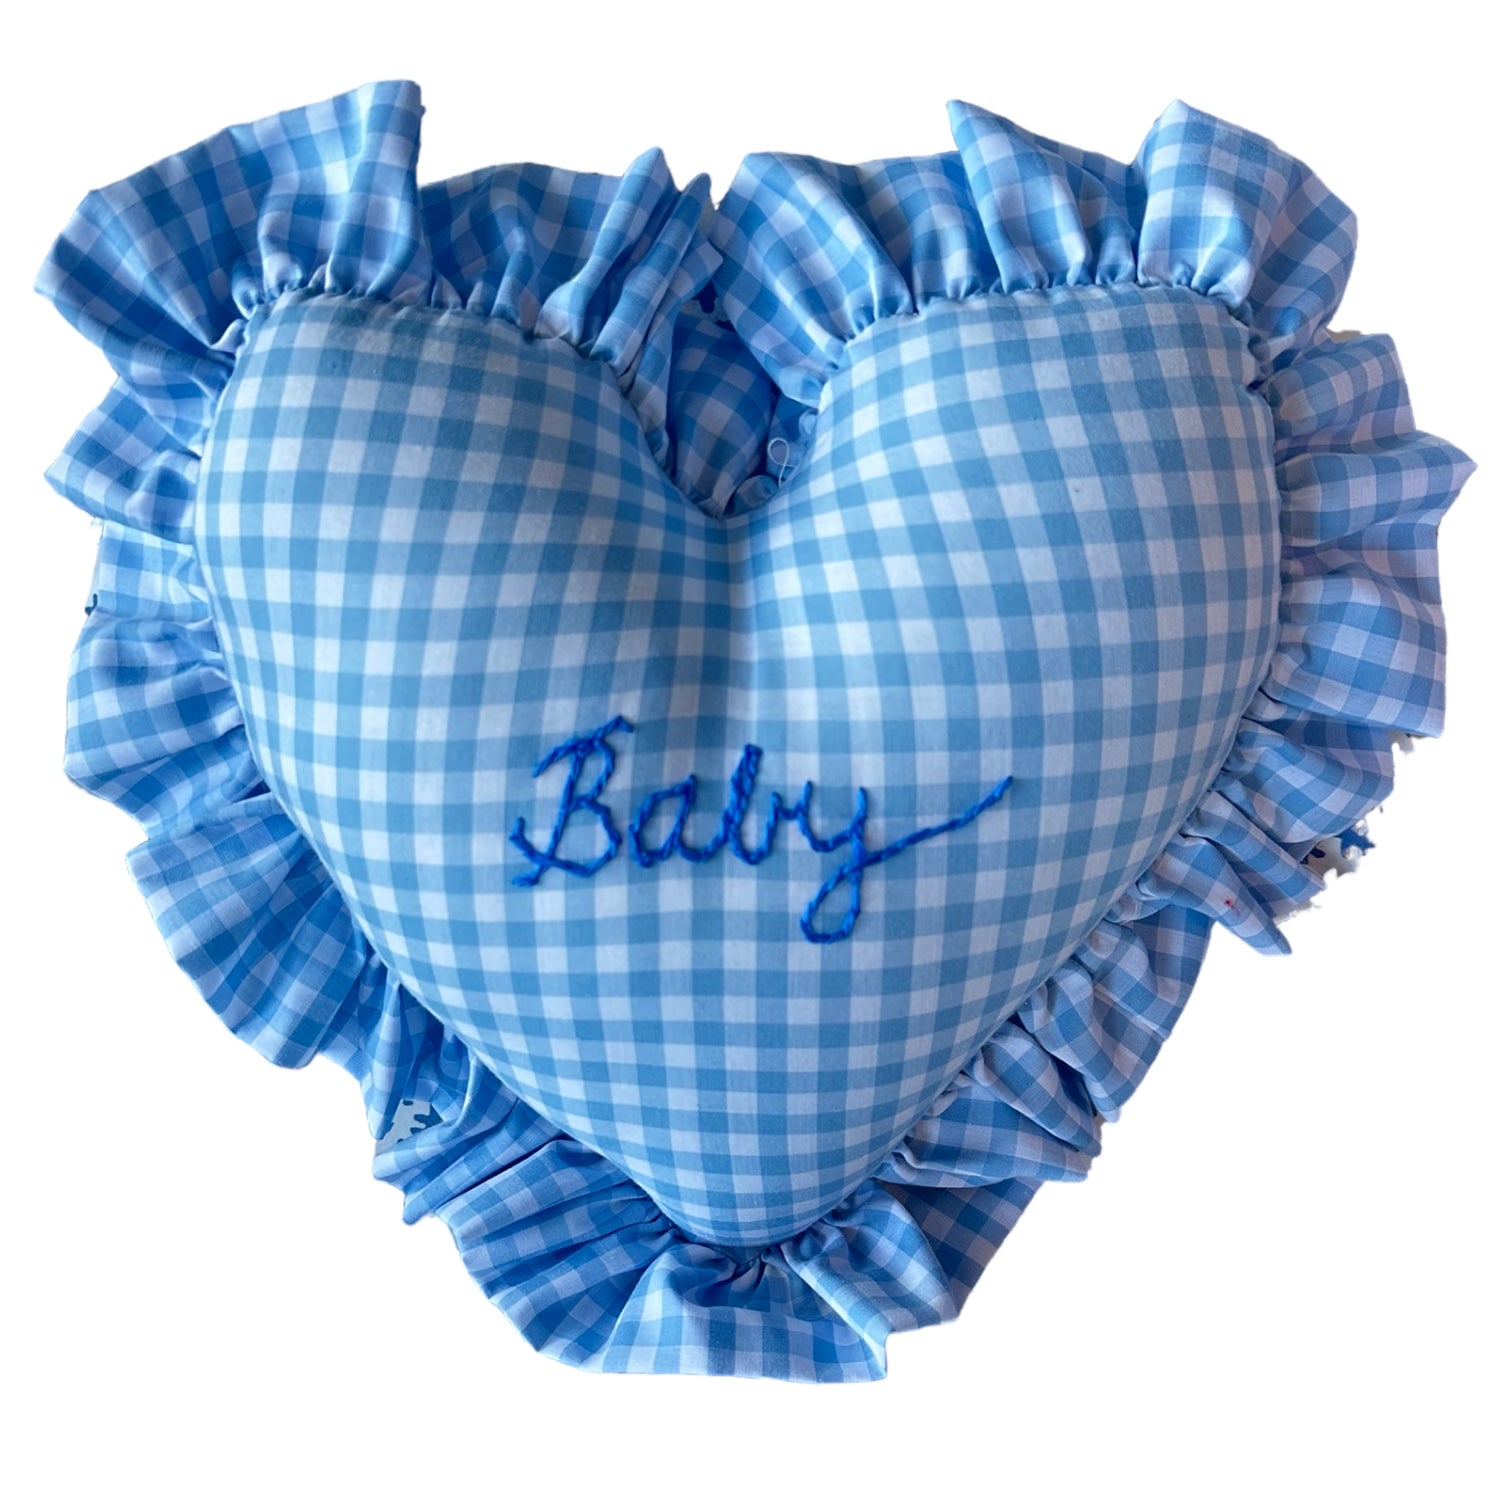 Heart Ruffle Pillow - baby blue gingham - Premium  from Tricia Lowenfield Design 